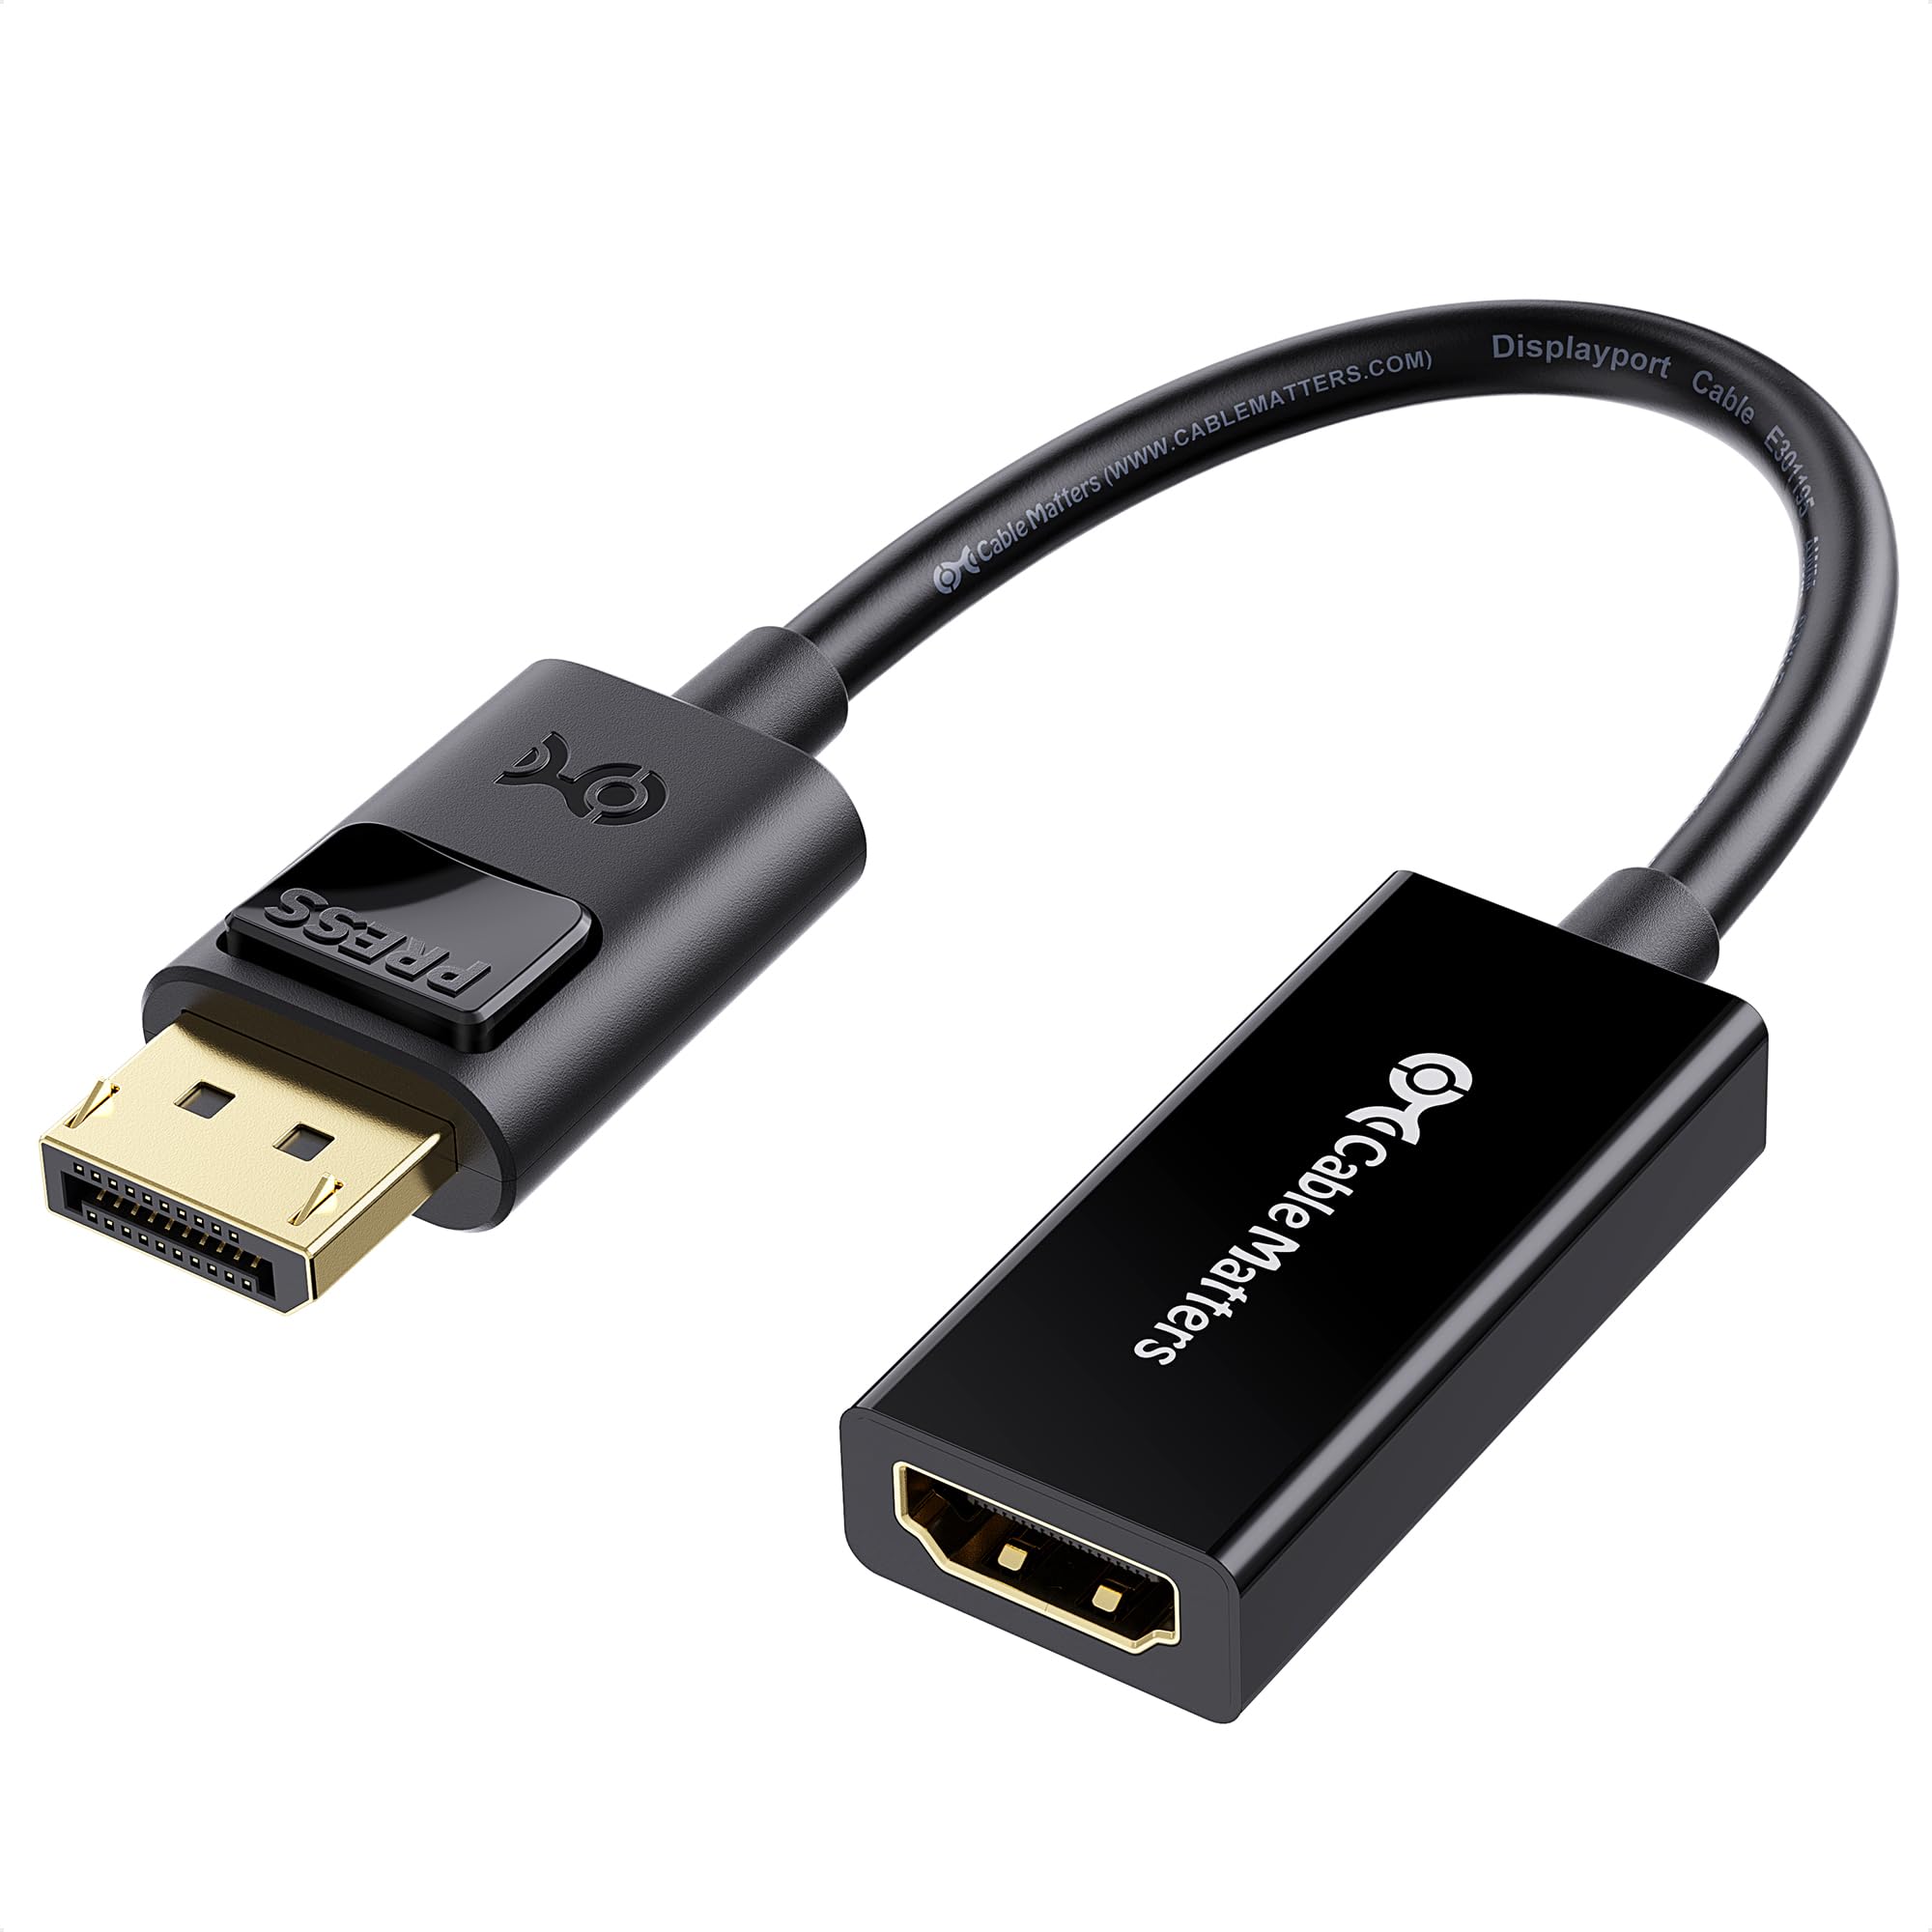 Disconnected HDMI cable